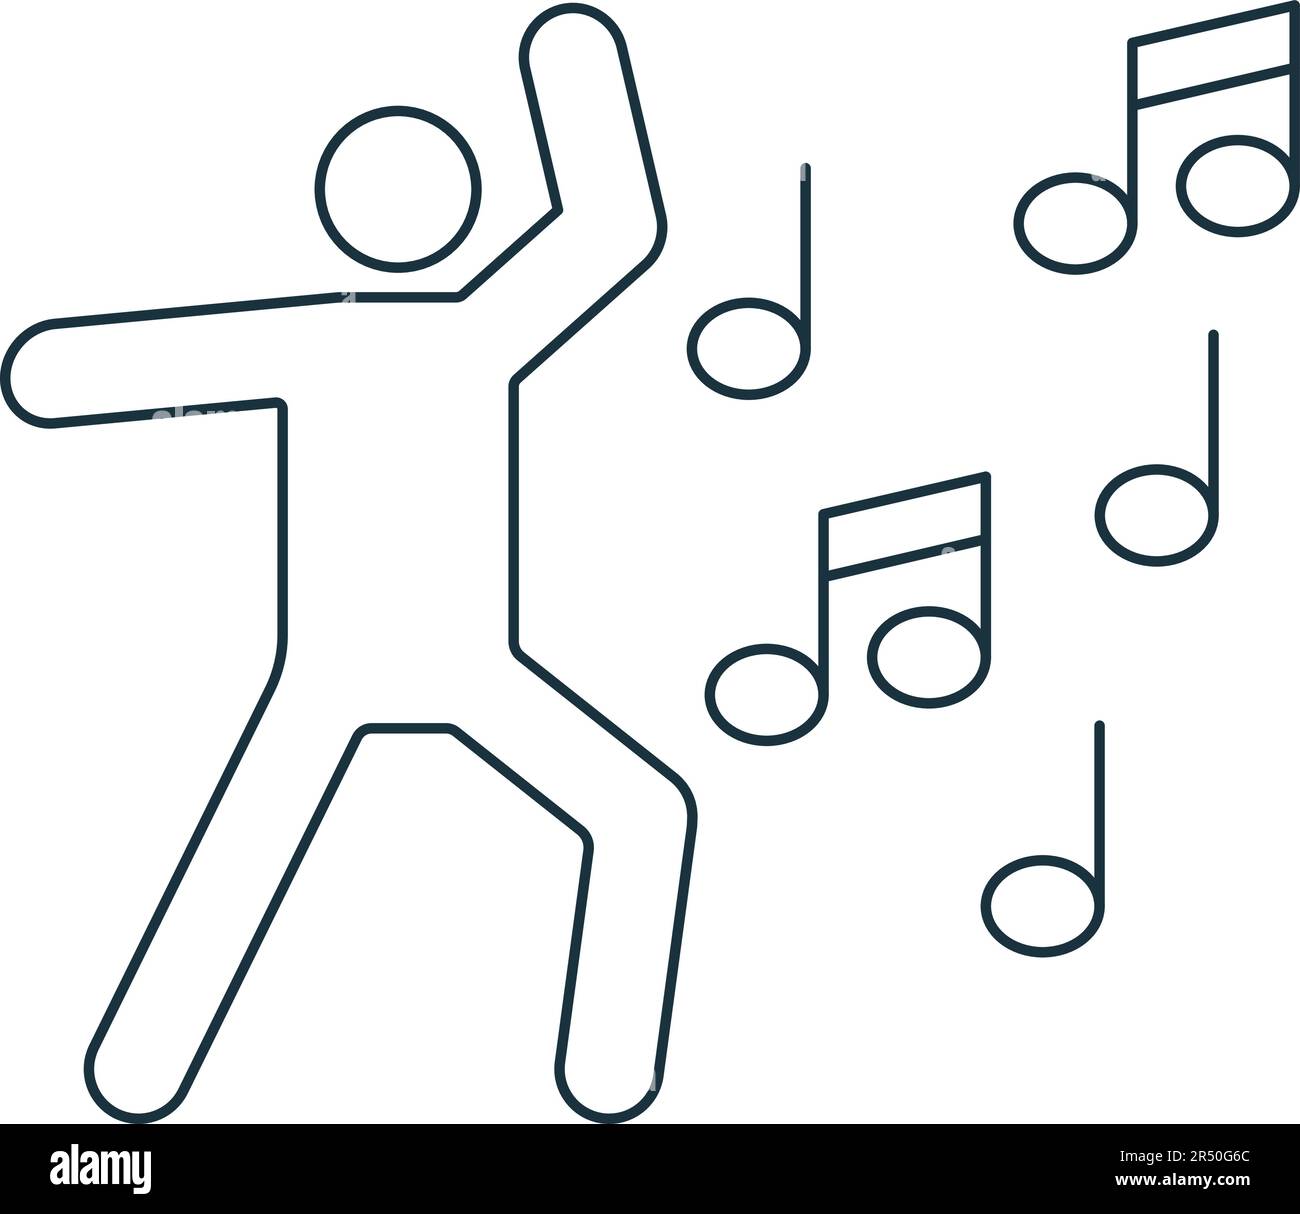 Dancing icon. Monochrome simple sign from hobby collection. Dancing icon for logo, templates, web design and infographics. Stock Vector